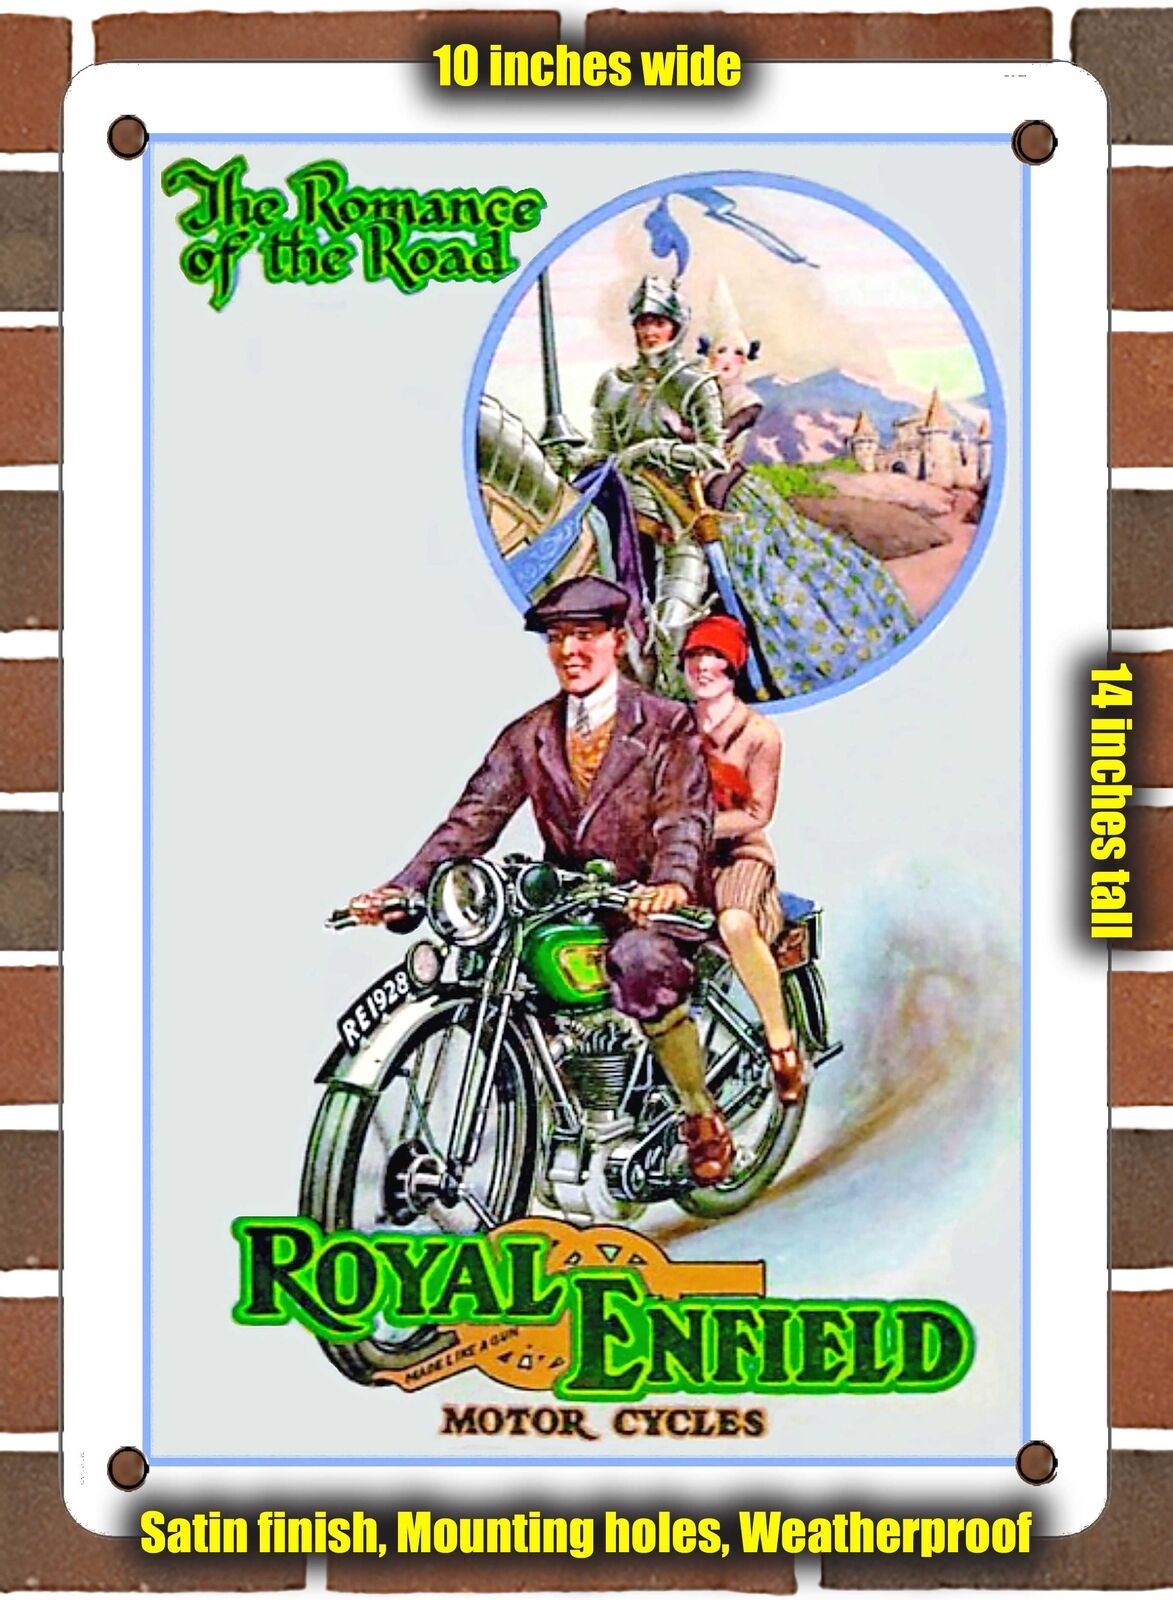 METAL SIGN - 1928 Royal Enfield Motorcycles the Romance of the Road - 10x14